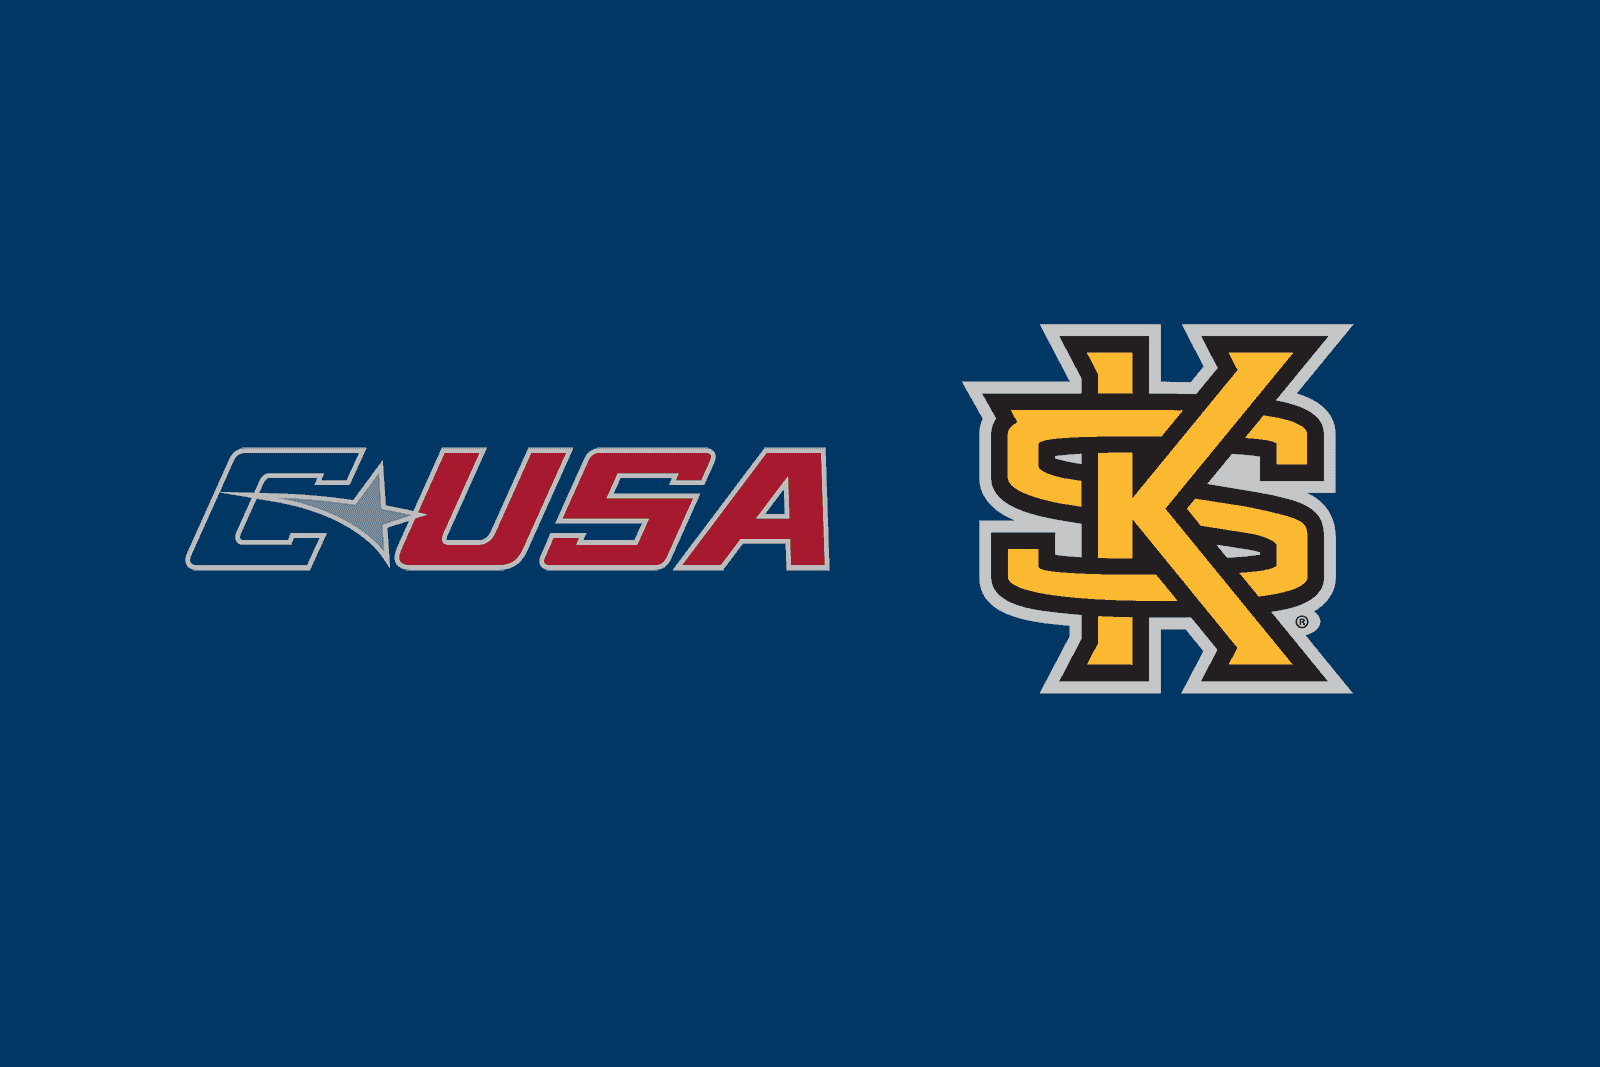 Conference USA-Kennesaw State